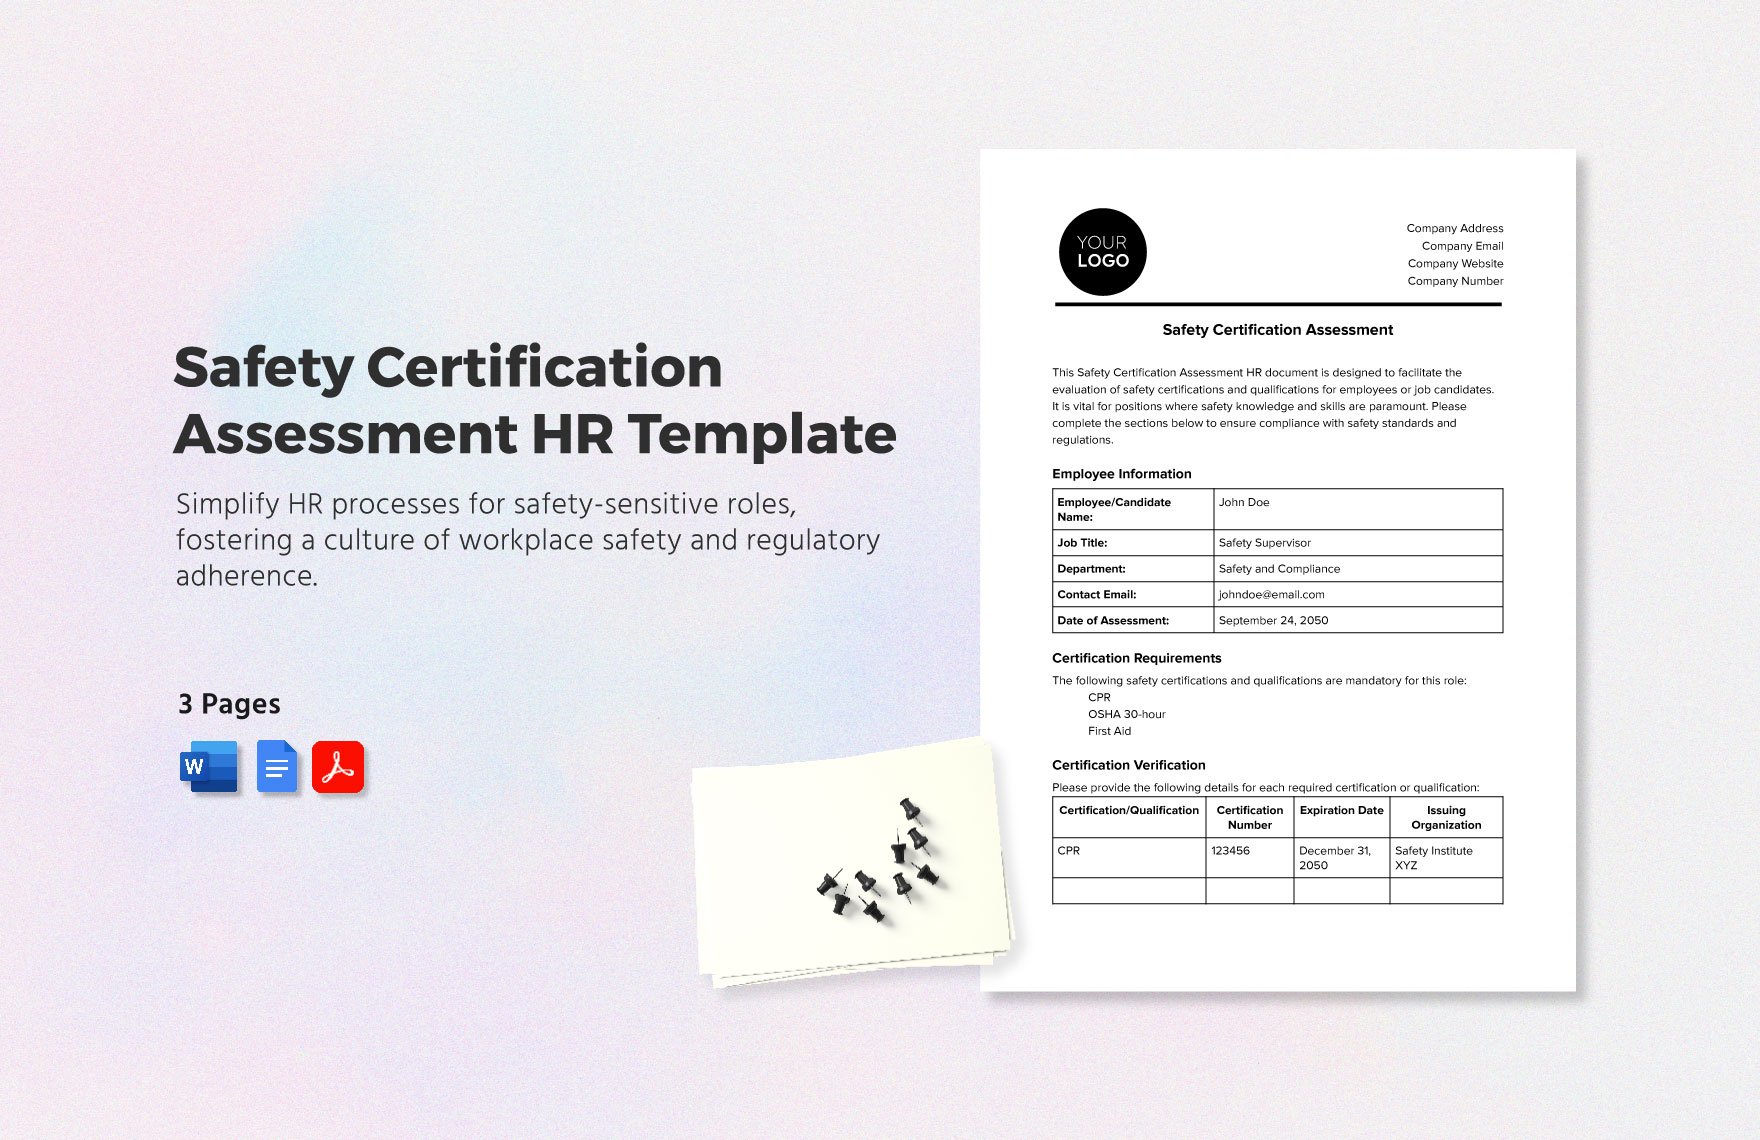 Safety Certification Assessment HR Template